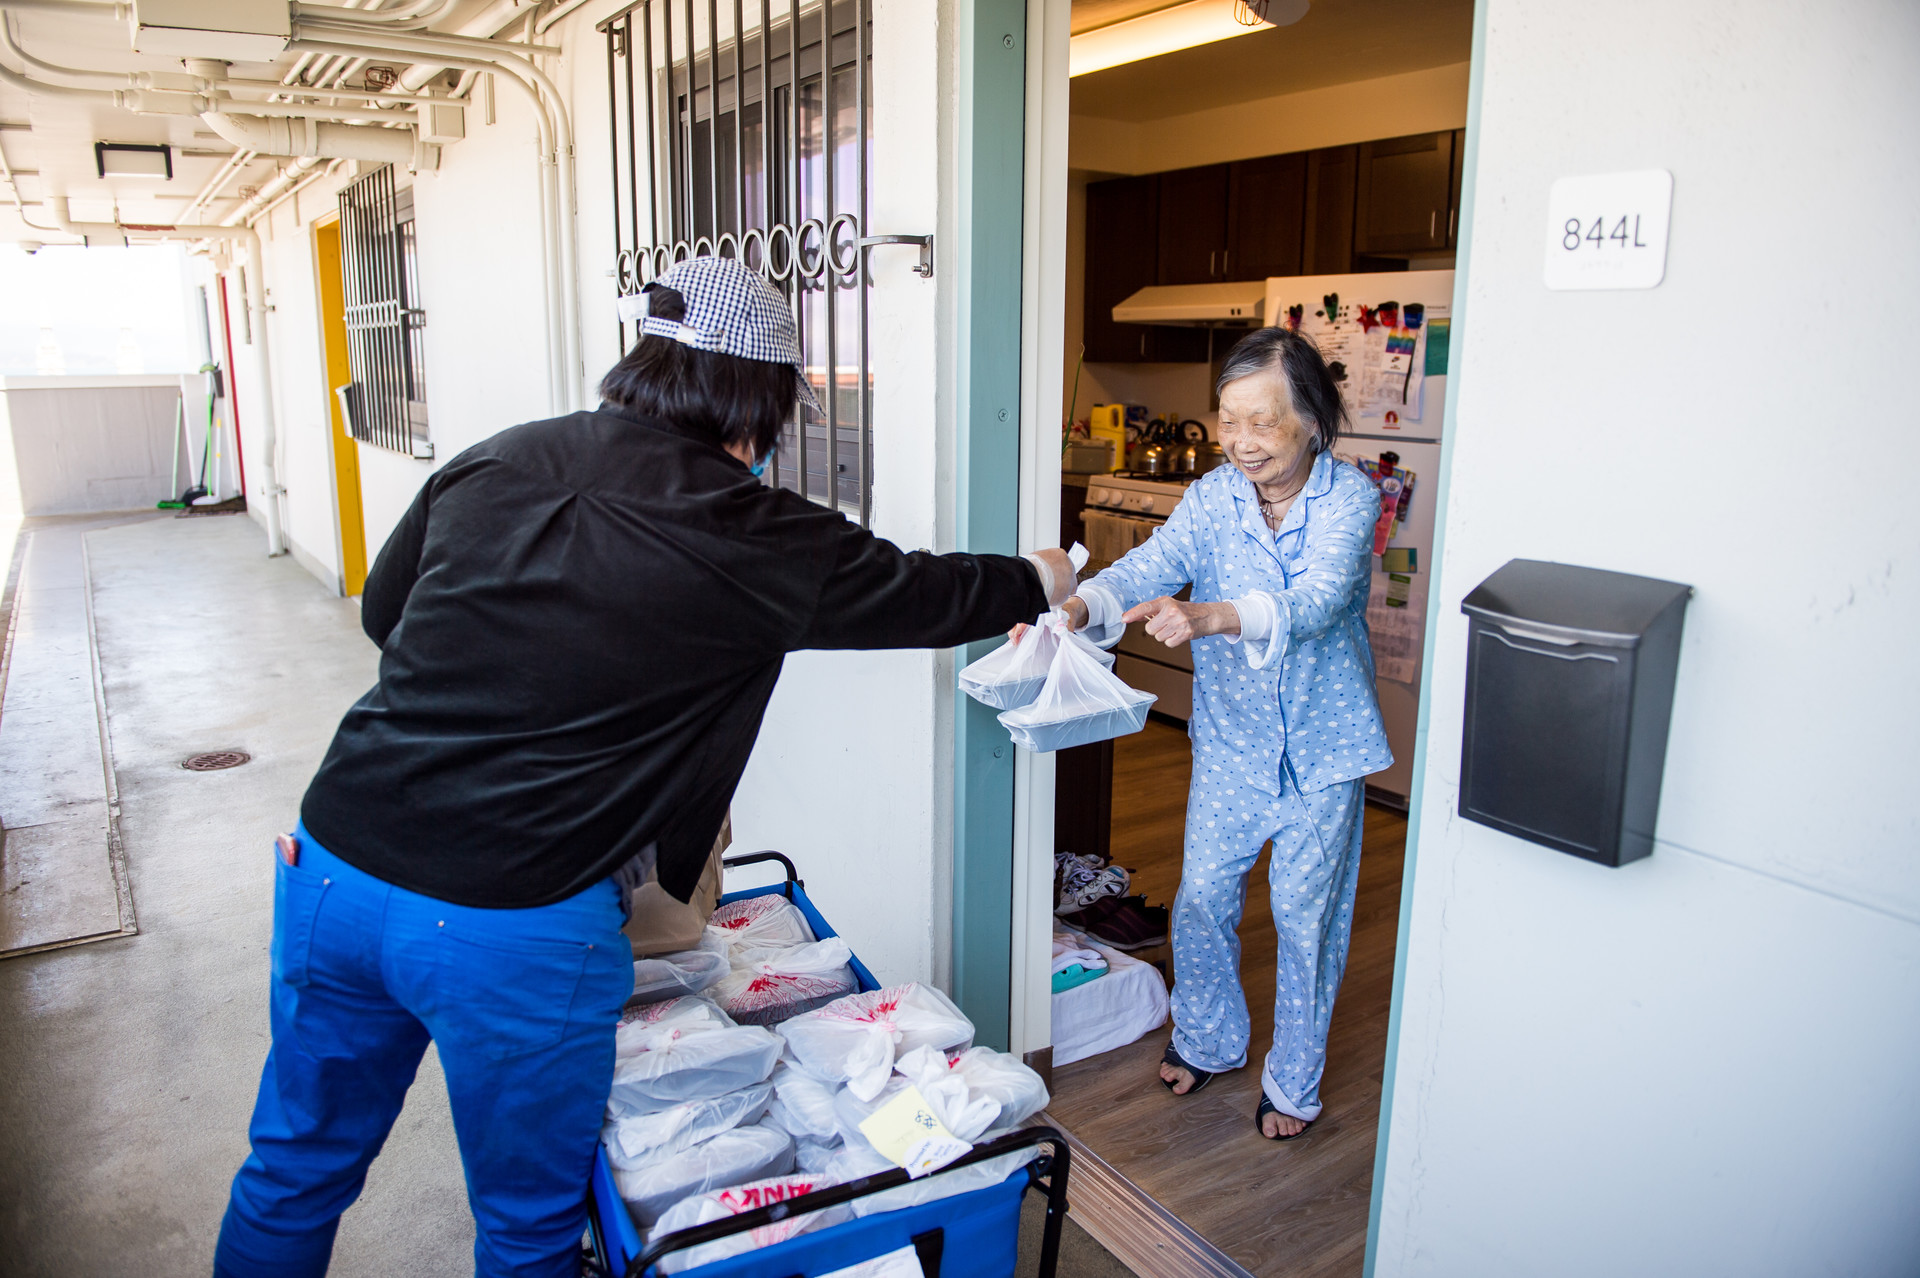 Ruqiong Fang delivers meals to residents at Ping Yuen, a public housing building in Chinatown, on April 5, 2020. Fang volunteers five days a week to help deliver meals.